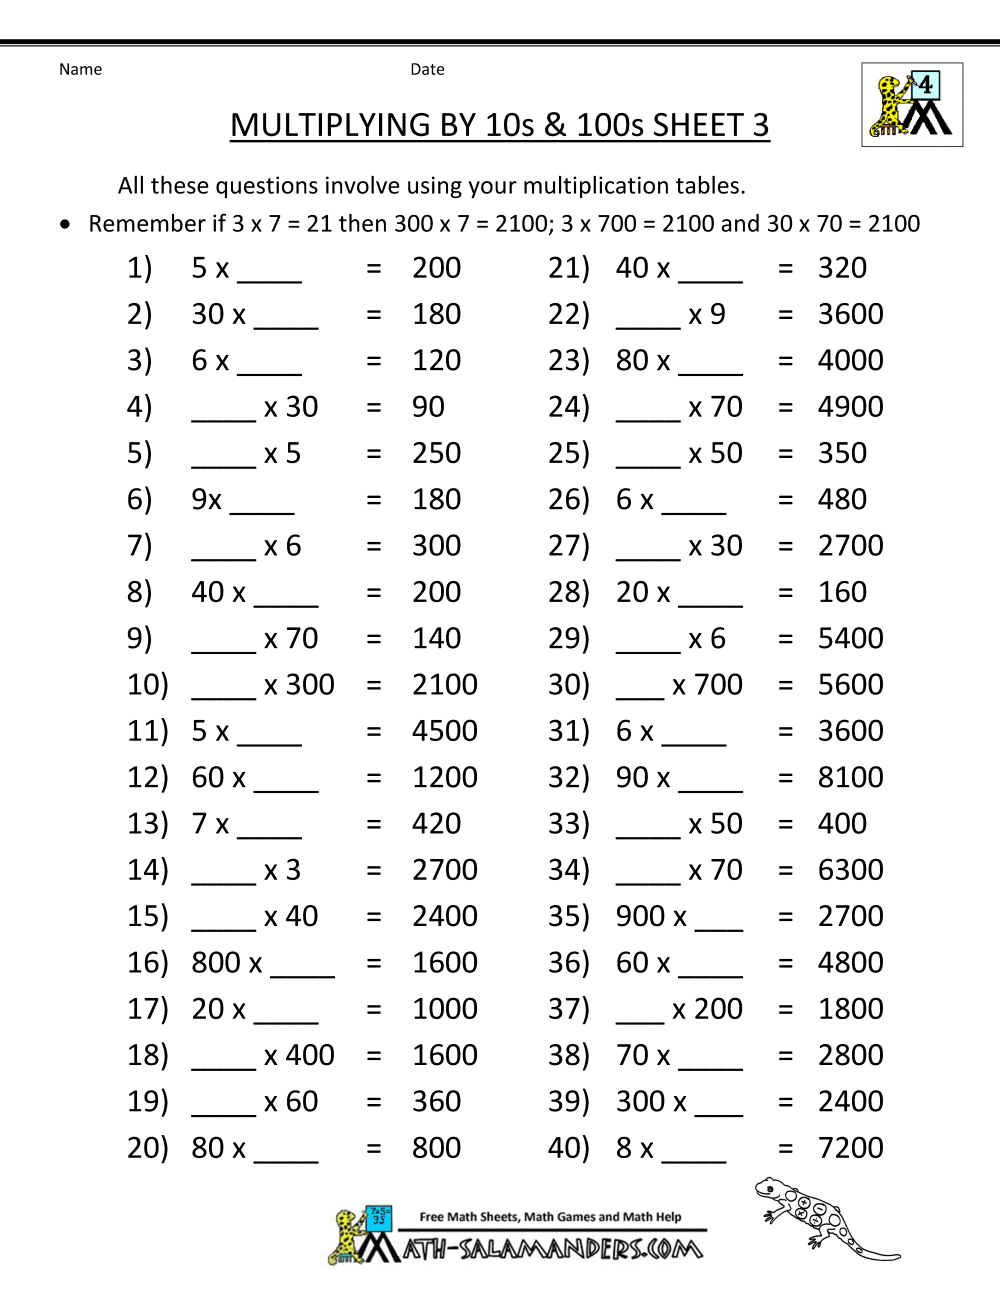 multiply-and-divide-by-10-100-and-1000-worksheets